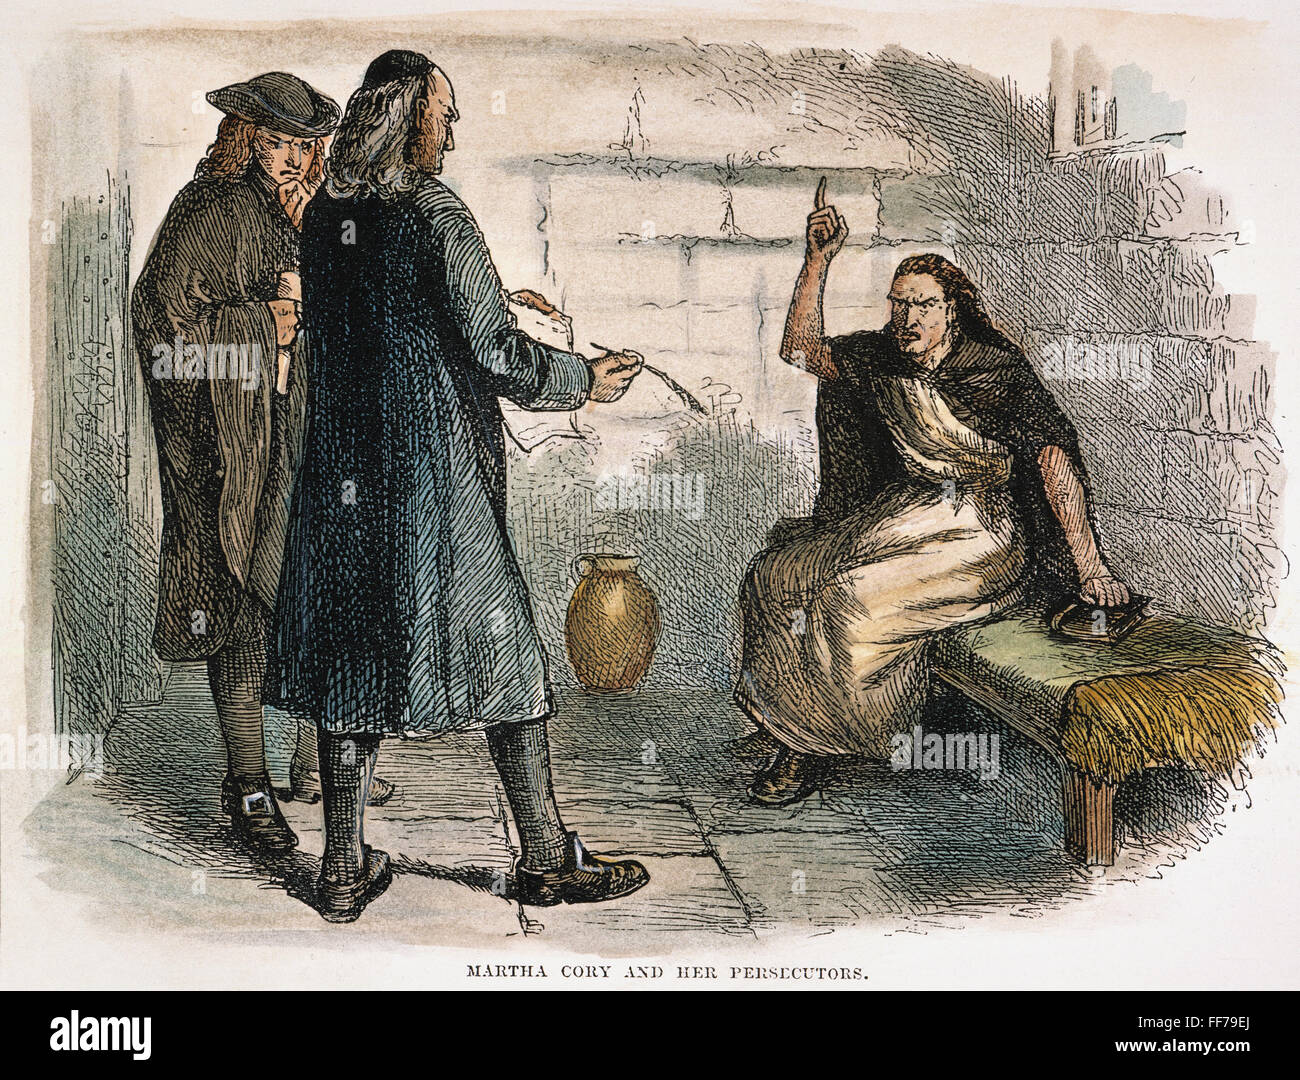 MARTHA COREY. /nThe accused 'witch' with her persecutors in her cell at Salem, Massachusetts, in 1692. American engraving, 19th century. Stock Photo